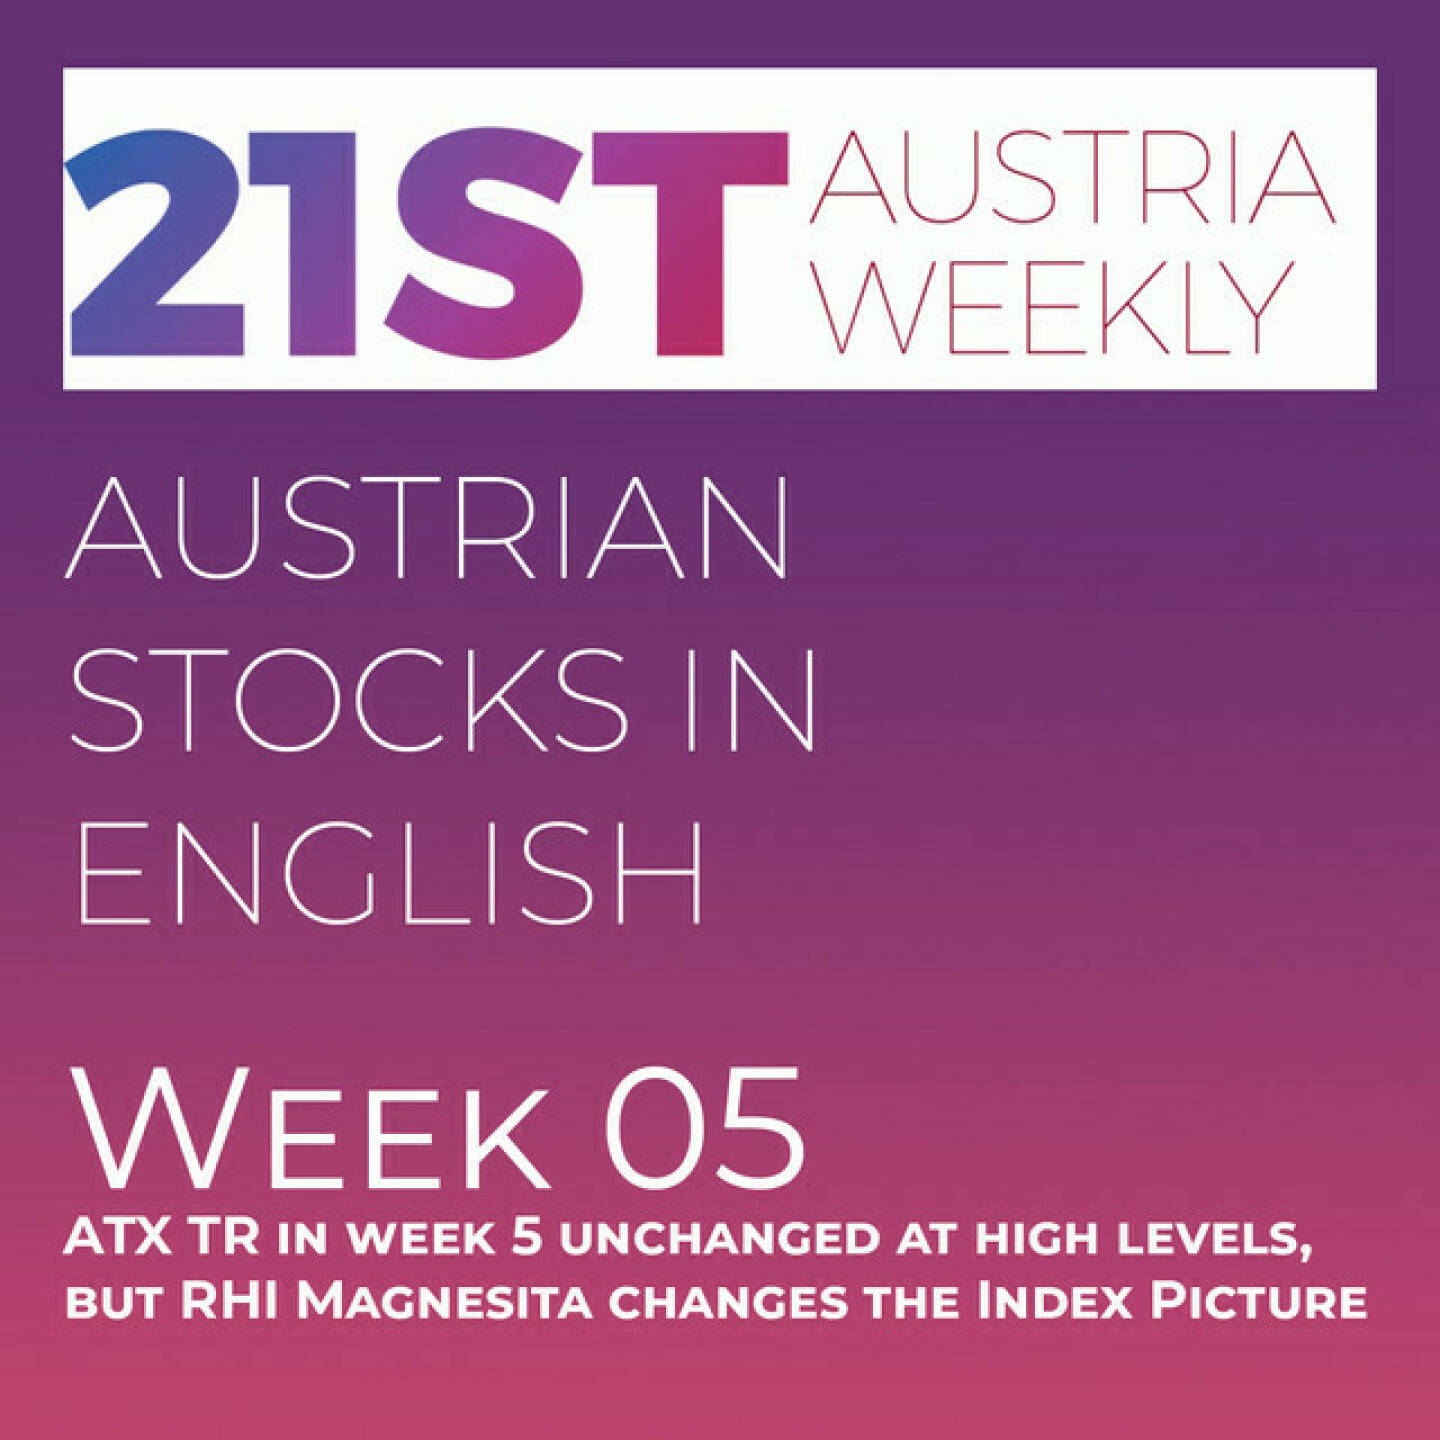 https://open.spotify.com/episode/7xelJDvQNVJXMAHSk8LH5X
Austrian Stocks in English: ATX TR in week 5 unchanged at high levels, but RHI Magnesita changes the Index Picture - <p>Welcome  to &#34;Austrian Stocks in English - presented by Palfinger&#34;, the english spoken weekly Summary for the Austrian Stock Market,  positioned every Sunday in the mostly german languaged Podcast &#34;Audio-CD.at Indie Podcasts&#34;- Wiener Börse, Sport Musik und Mehr“ . <br/><br/>This script is based on our 21st Austria weekly and Week 5 brought for ATX TR a consolidation on high levels, the index closed slightly better at 7131. Best stock in ATX Prime was RHI Magnesita, who entered the Index Watchlist at position 13 when it comes to Market Cap. News came from Austriacard, Croma-Pharma, ams Osram, Pierer Mobility, Uniqa, Palfinger, Andritz, CA Immo, RBI, AT&amp;S, Austrian Post, Siemens AG Österreich and Kontron, spoken by the absolutely smart Alison.<br/><br/>Please rate my Podcast on Apple Podcasts (or Spotify): <a href=https://podcasts.apple.com/at/podcast/audio-cd-at-indie-podcasts-wiener-börse-sport-musik-und-mehr/id1484919130 target=_blank>https://podcasts.apple.com/at/podcast/audio-cd-at-indie-podcasts-wiener-börse-sport-musik-und-mehr/id1484919130</a> .And please spread the word : <a href=https://www.boerse-social.com/21staustria target=_blank>https://www.boerse-social.com/21staustria</a> - the address to subscribe to the weekly summary as a PDF.</p>